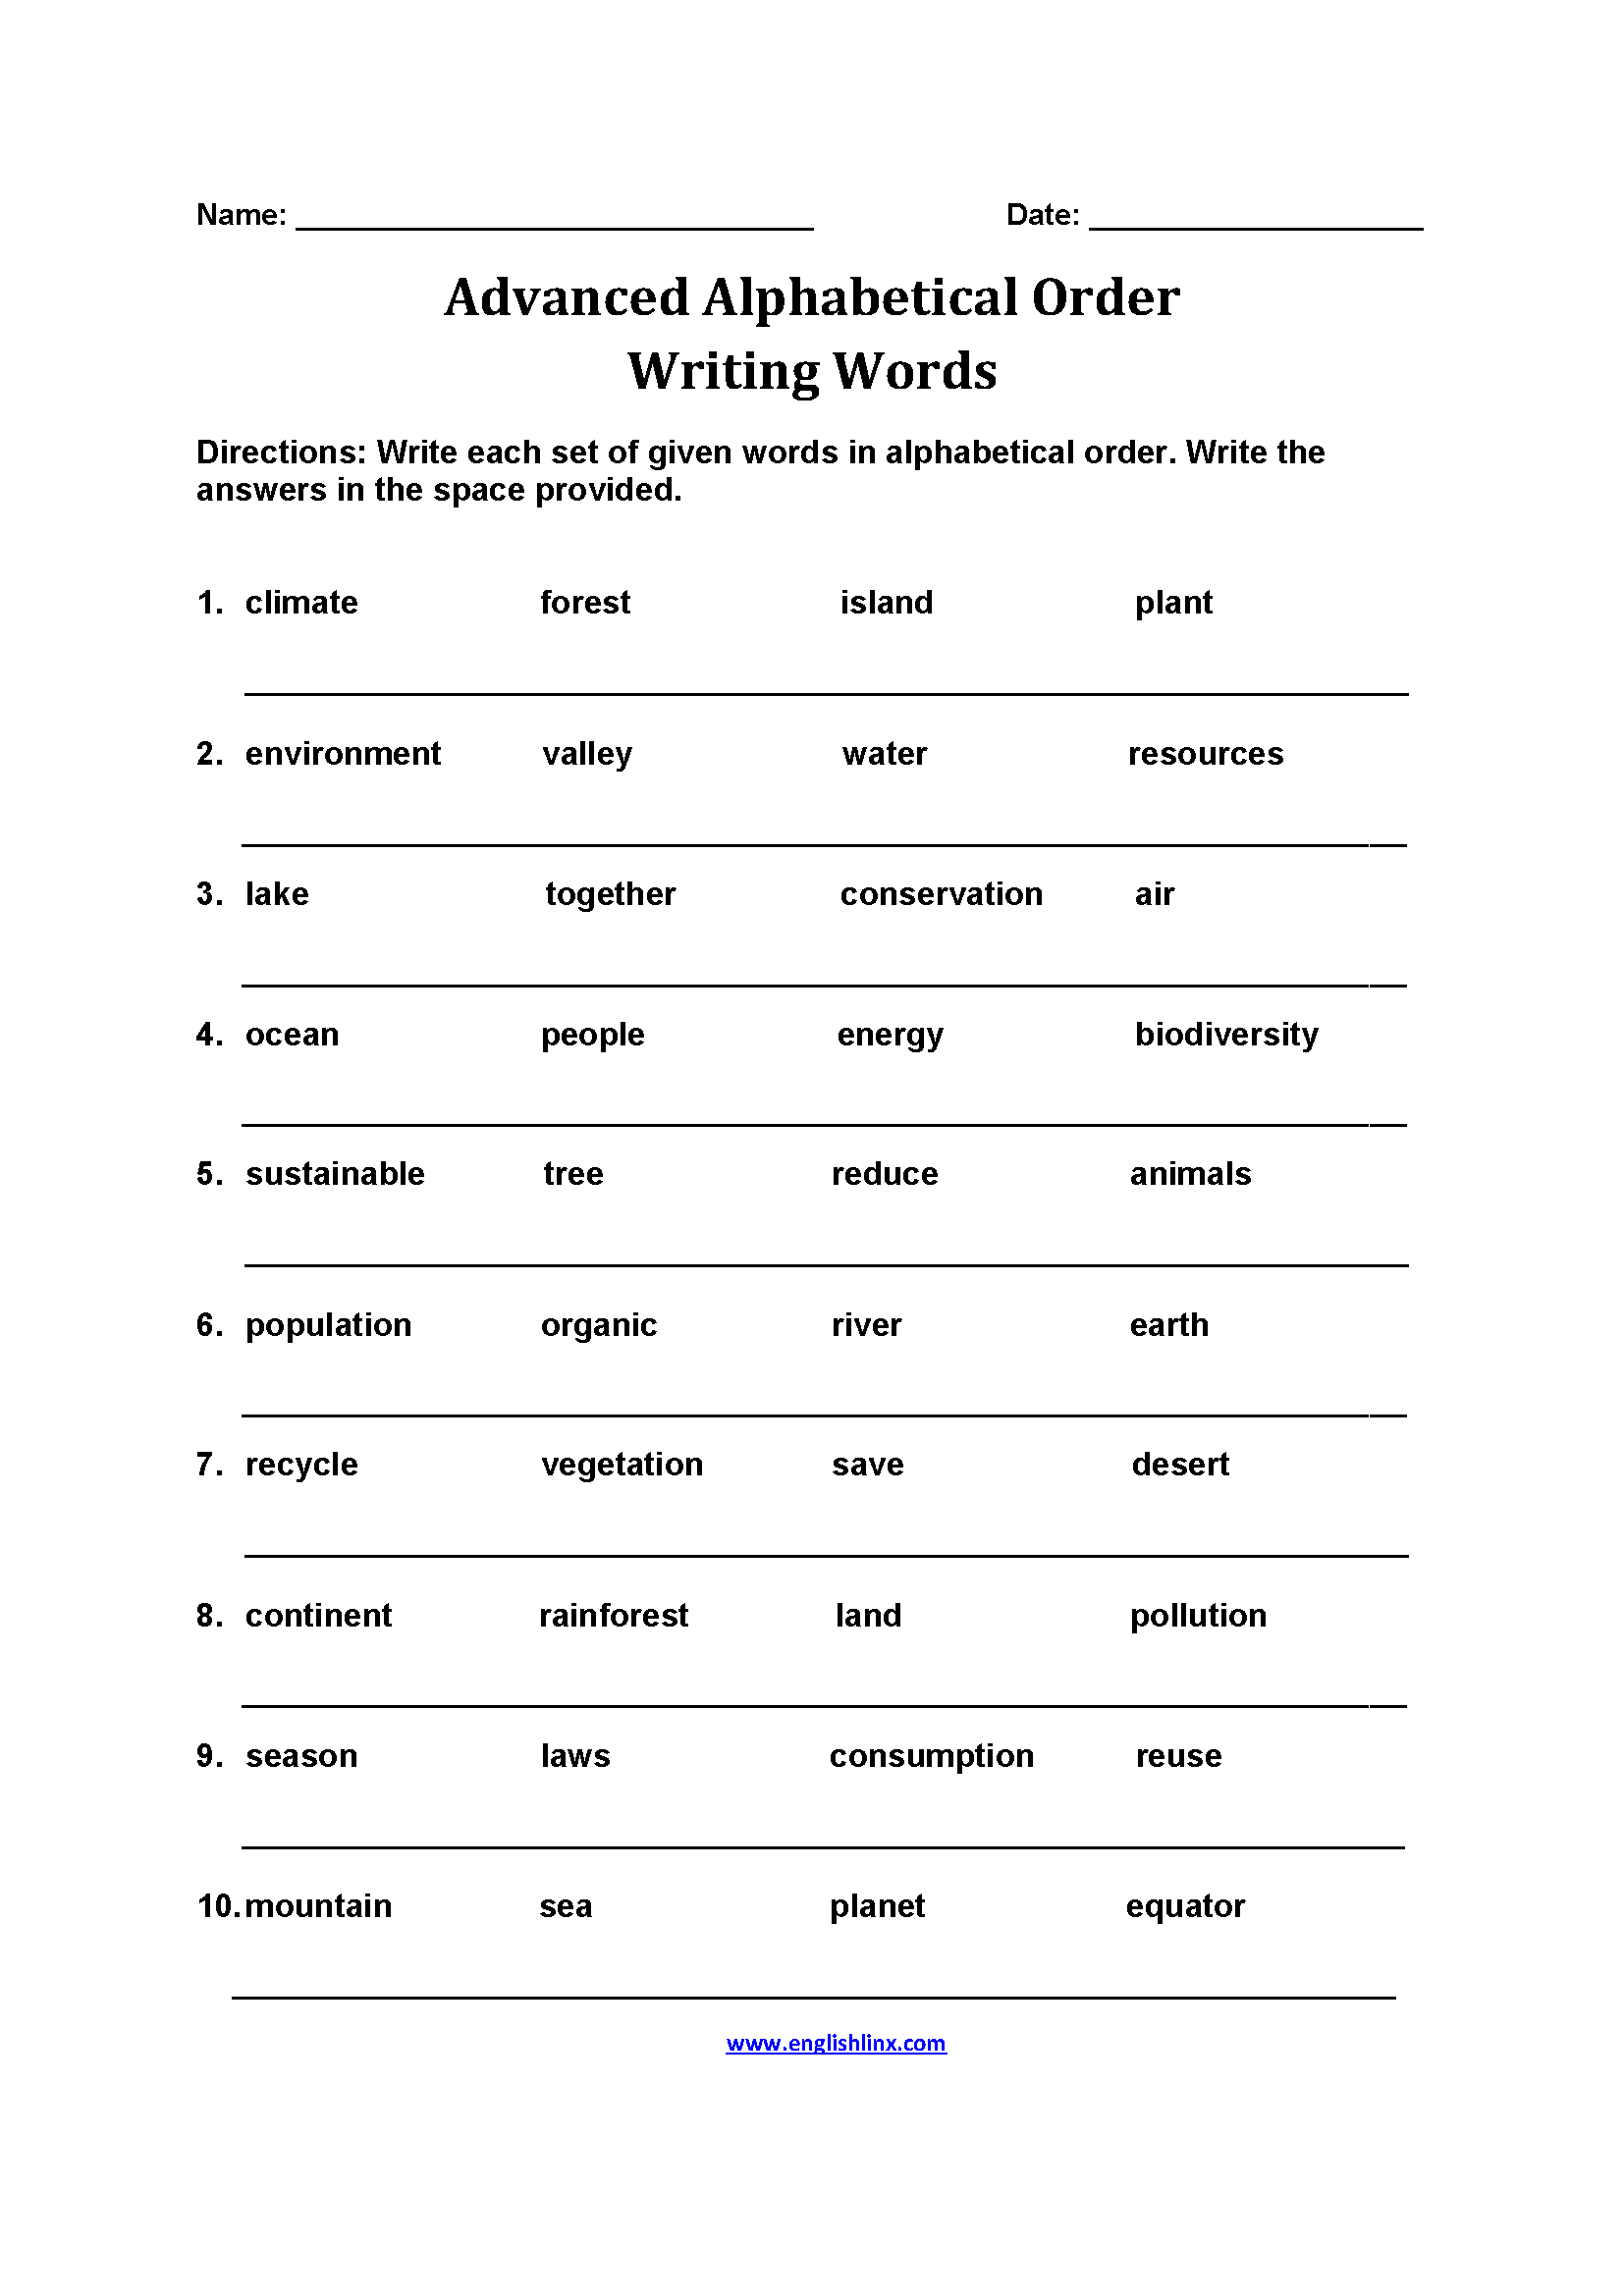 Advanced Alphabetical Order Writing Words Worksheets